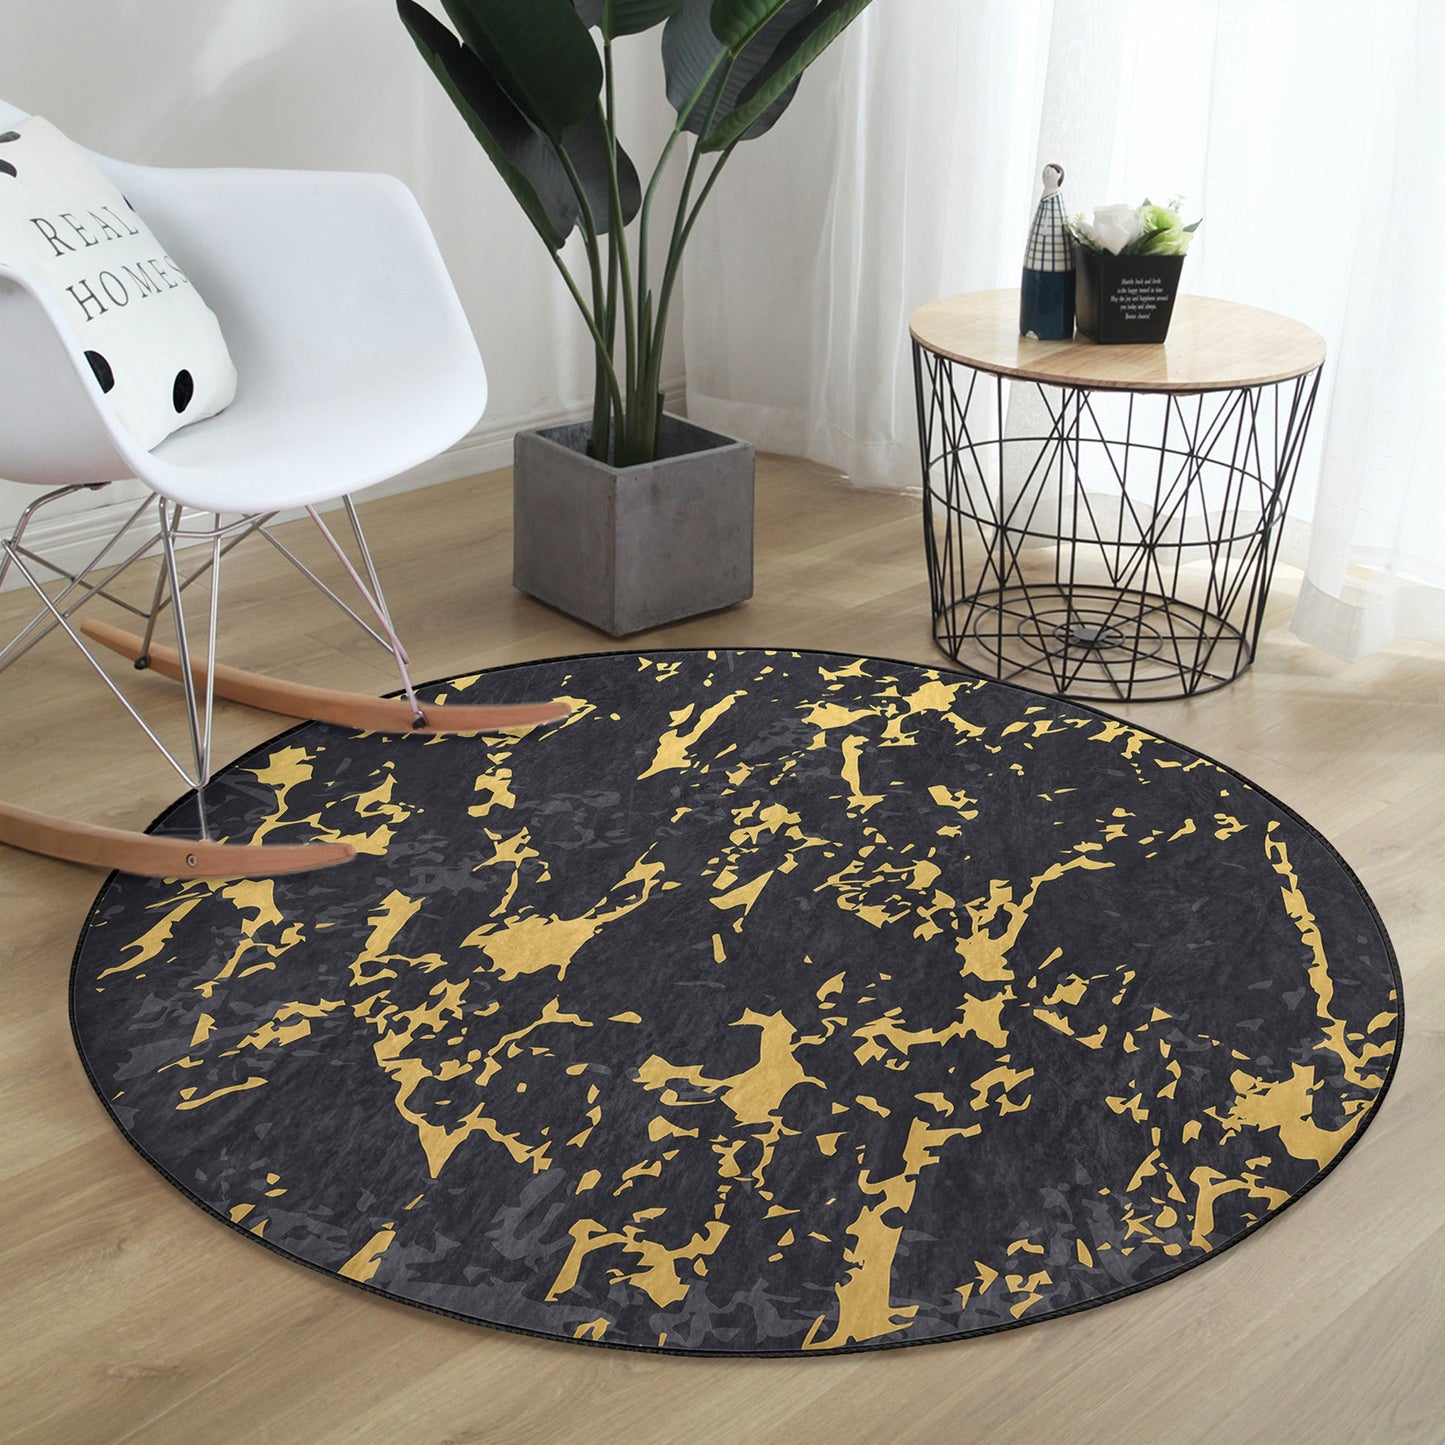 Washable Rug with Marble Design - Easy Maintenance